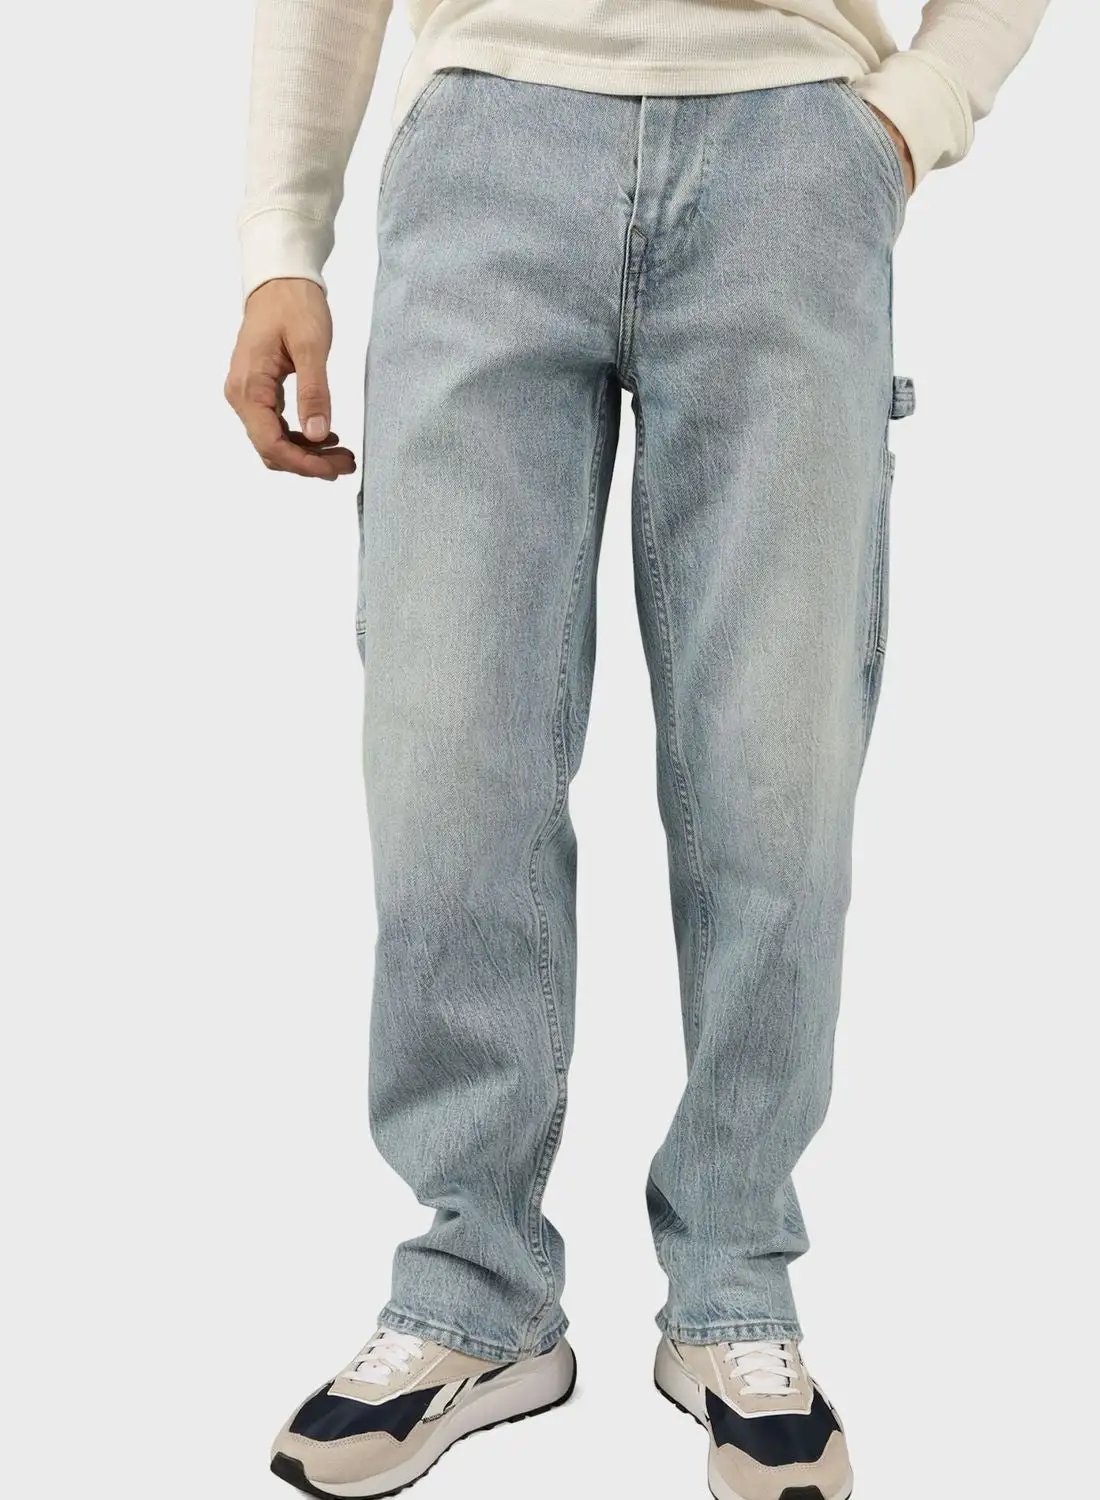 American Eagle Light Wash Straight Fit Jeans